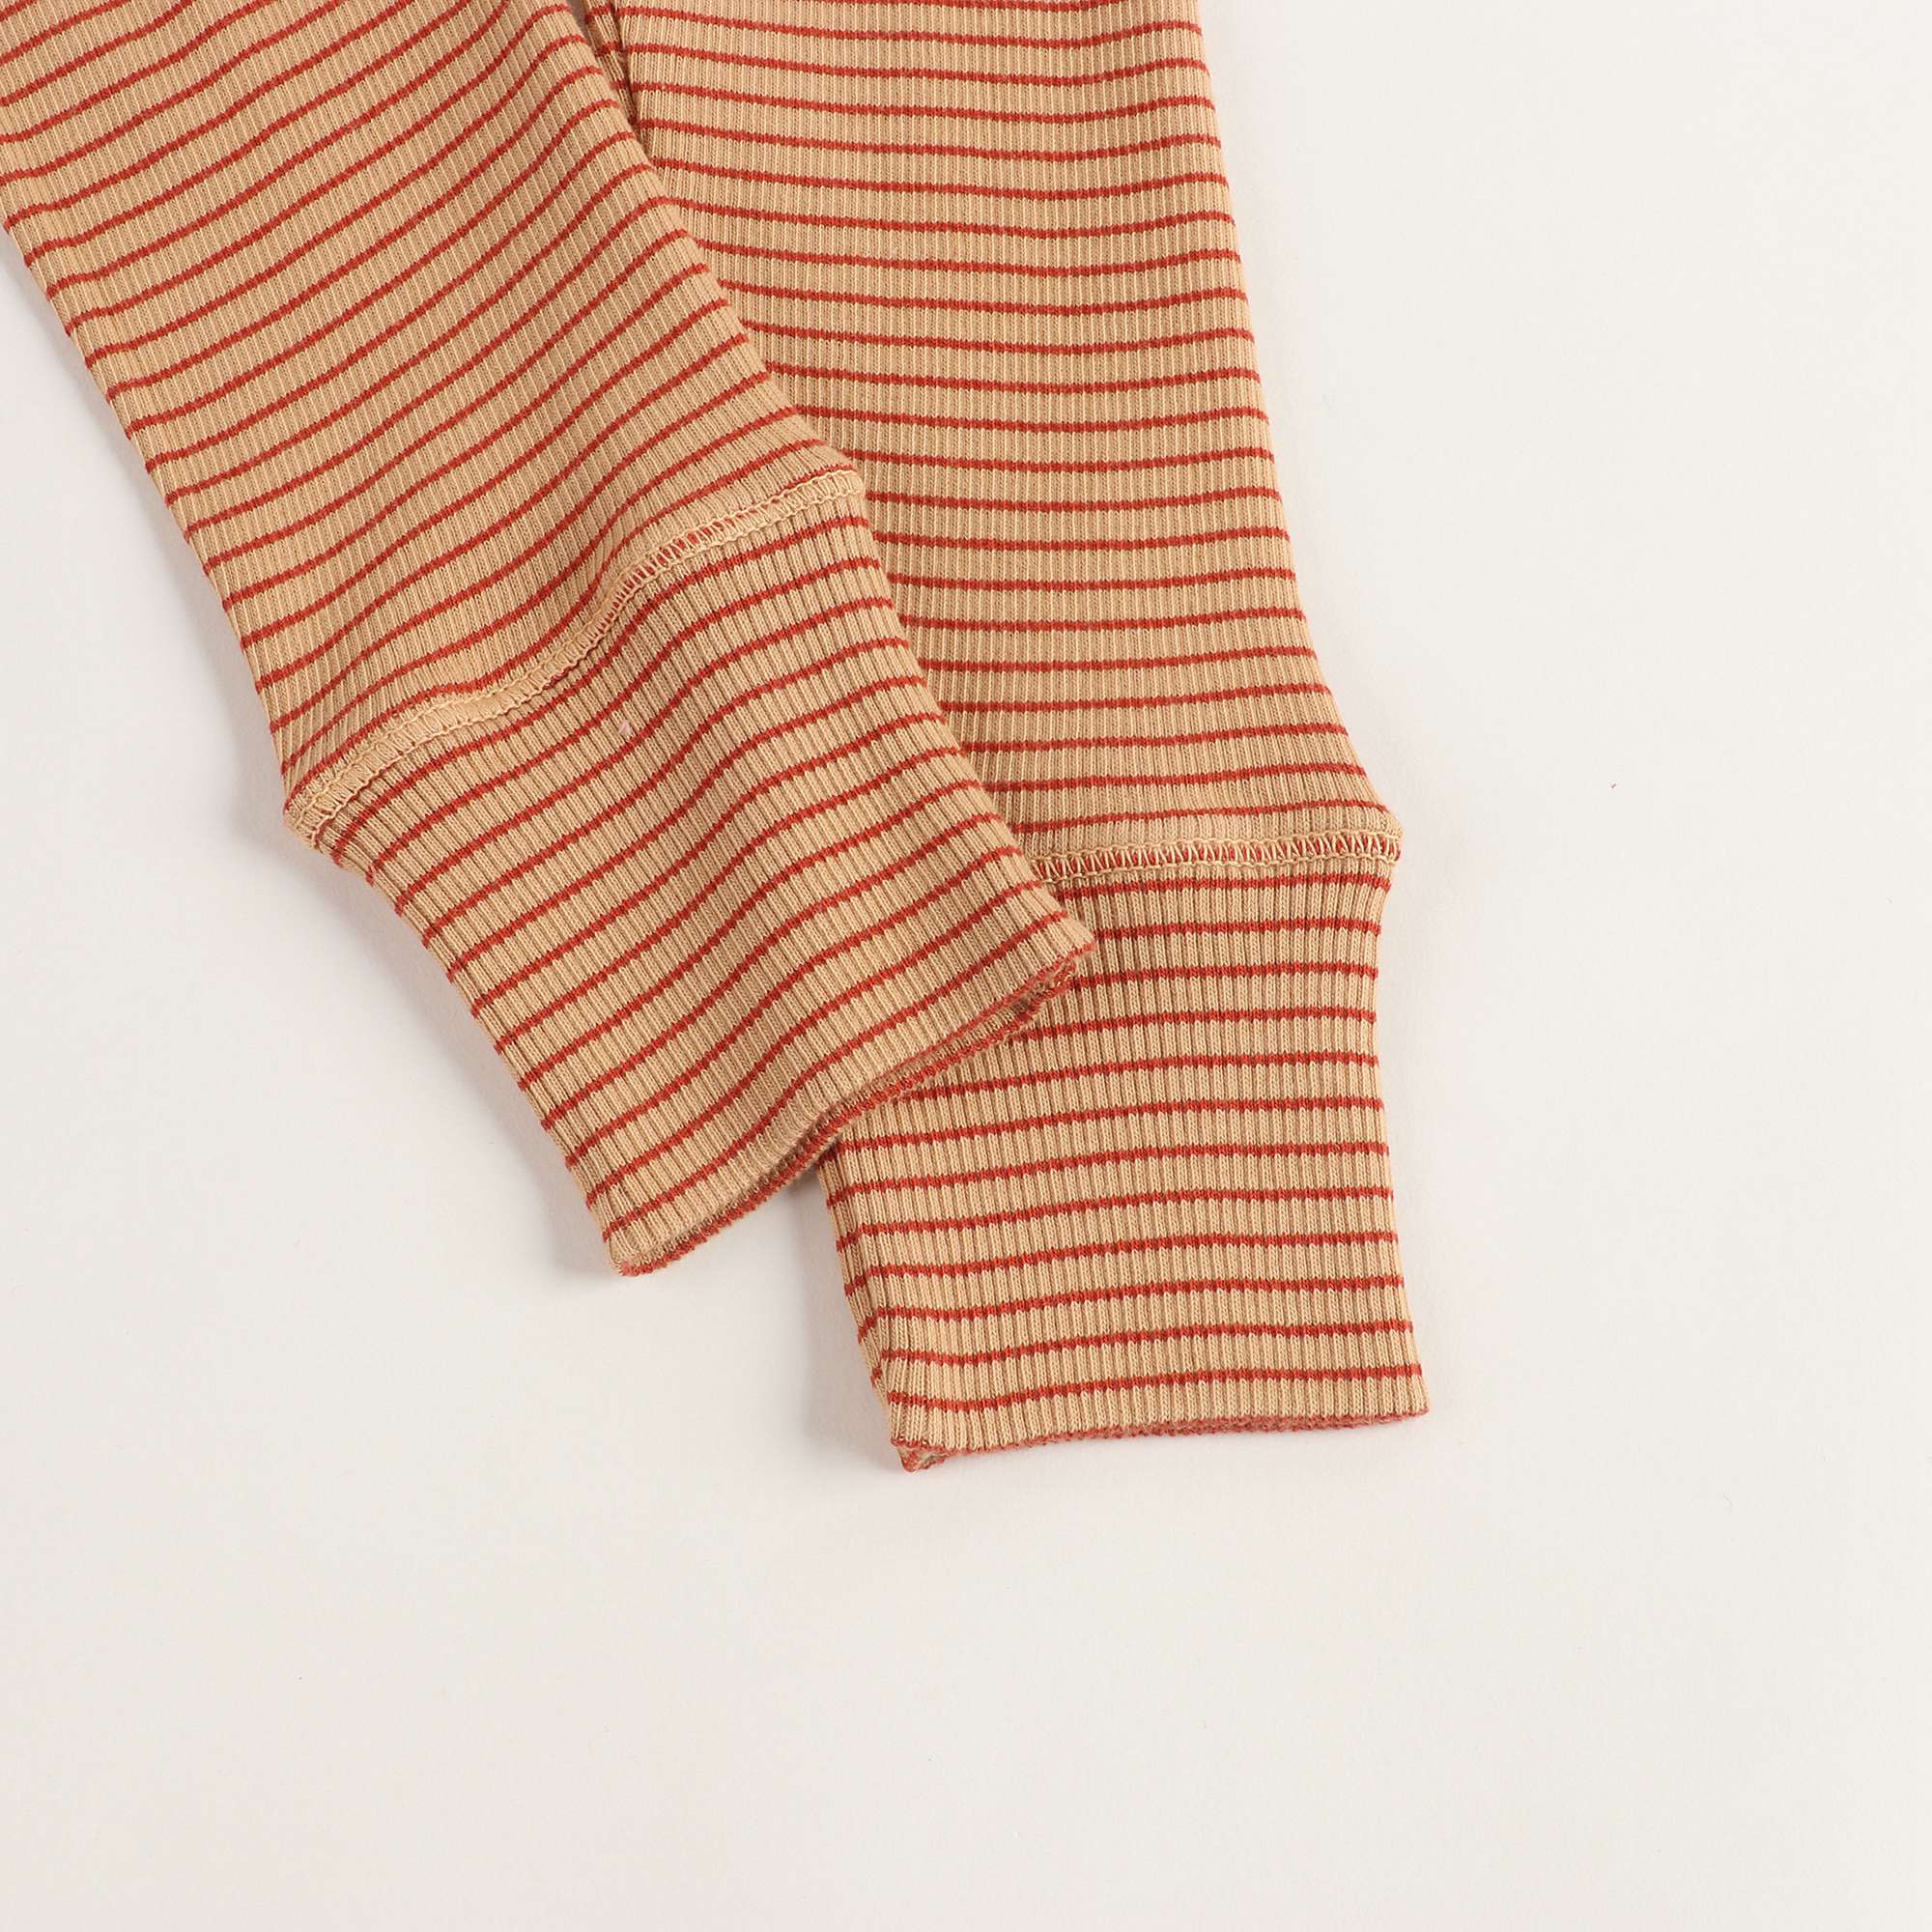 Girls Camel & Rust Cotton Trousers